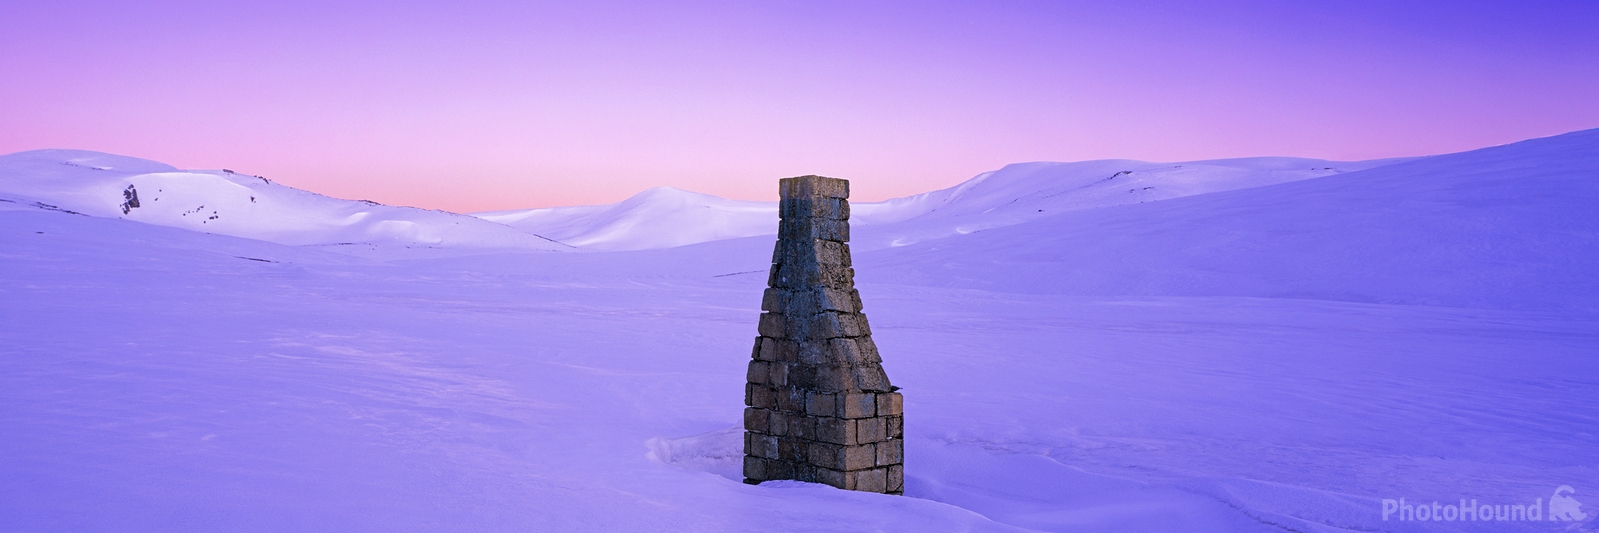 Image of Foreman’s Chimney, Kosciuszko National Park by Mike Banks